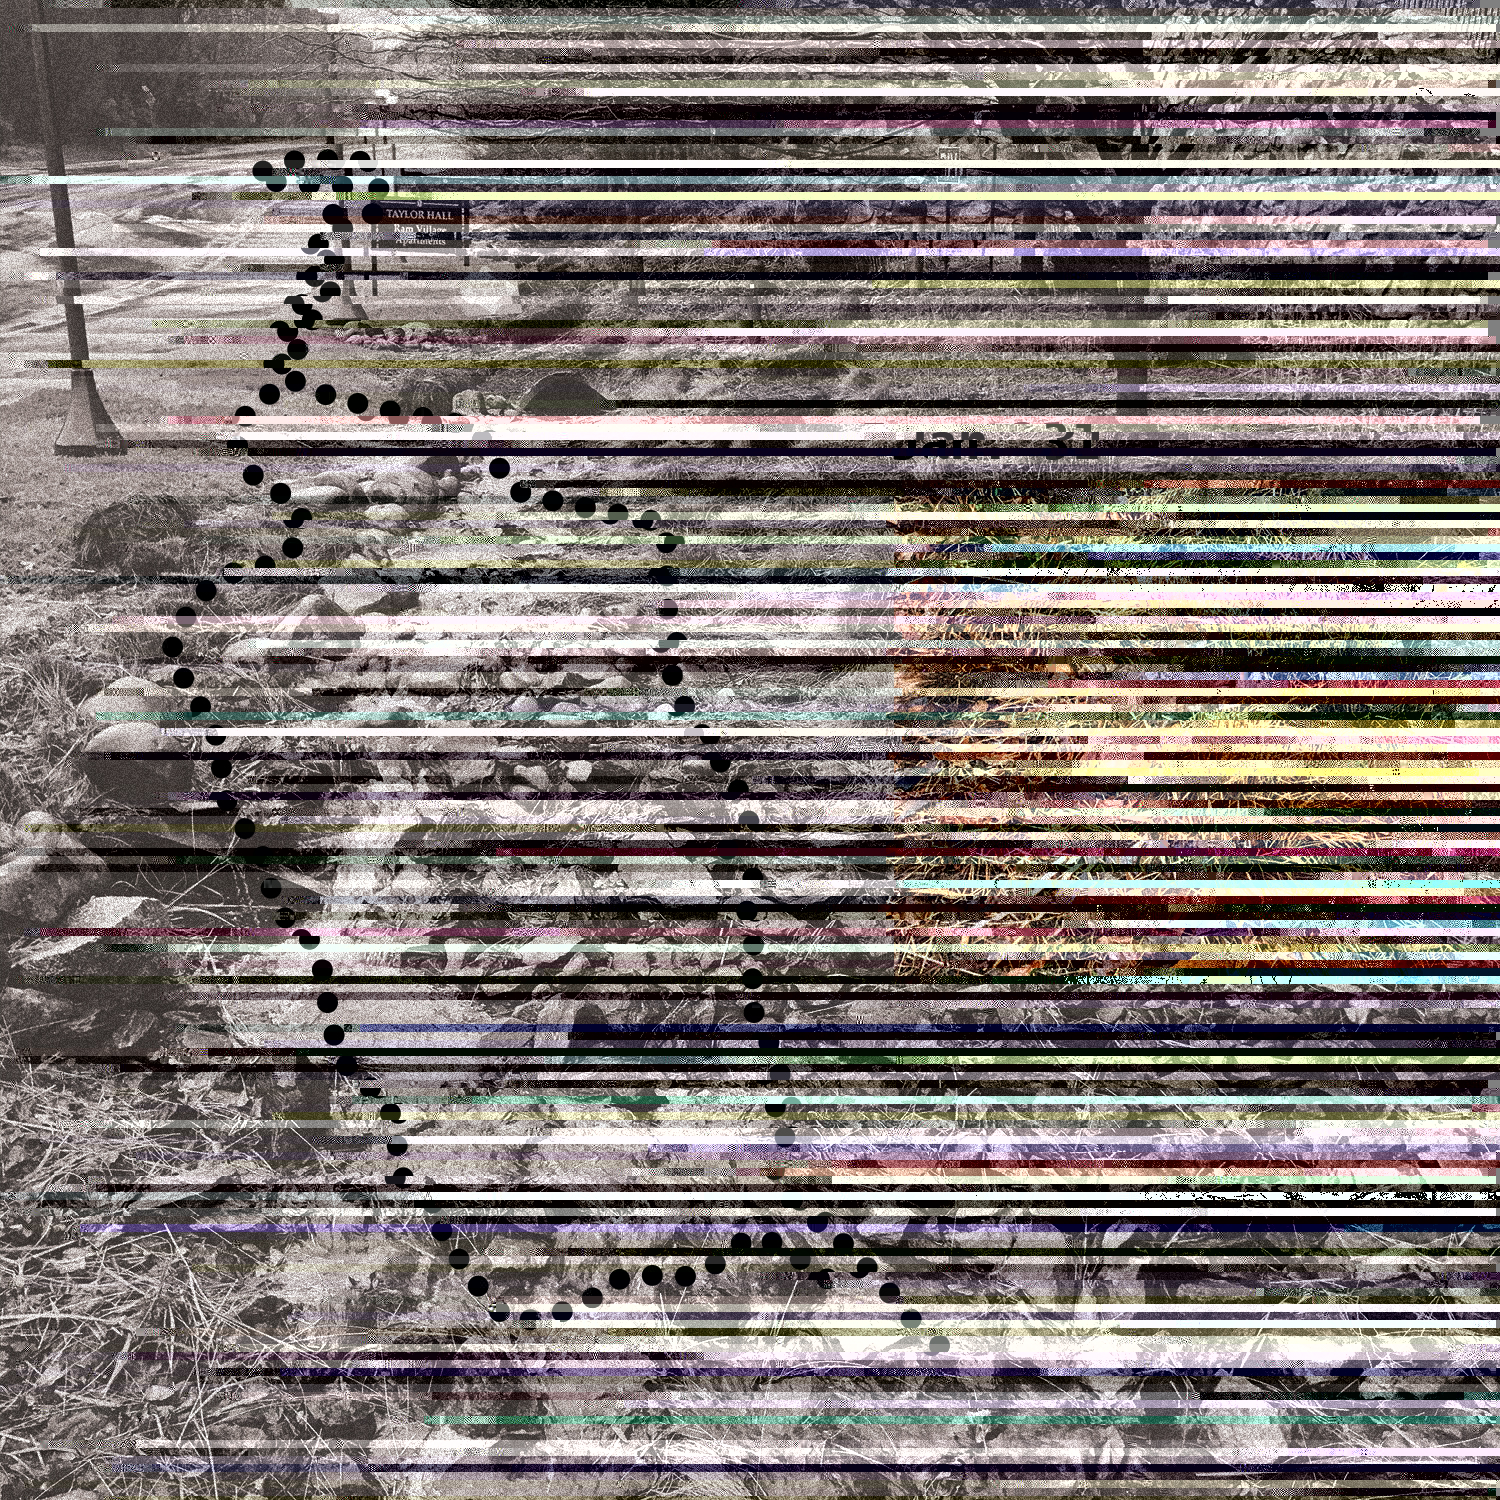 "glitched" version of a black and white photograph of a street and yard